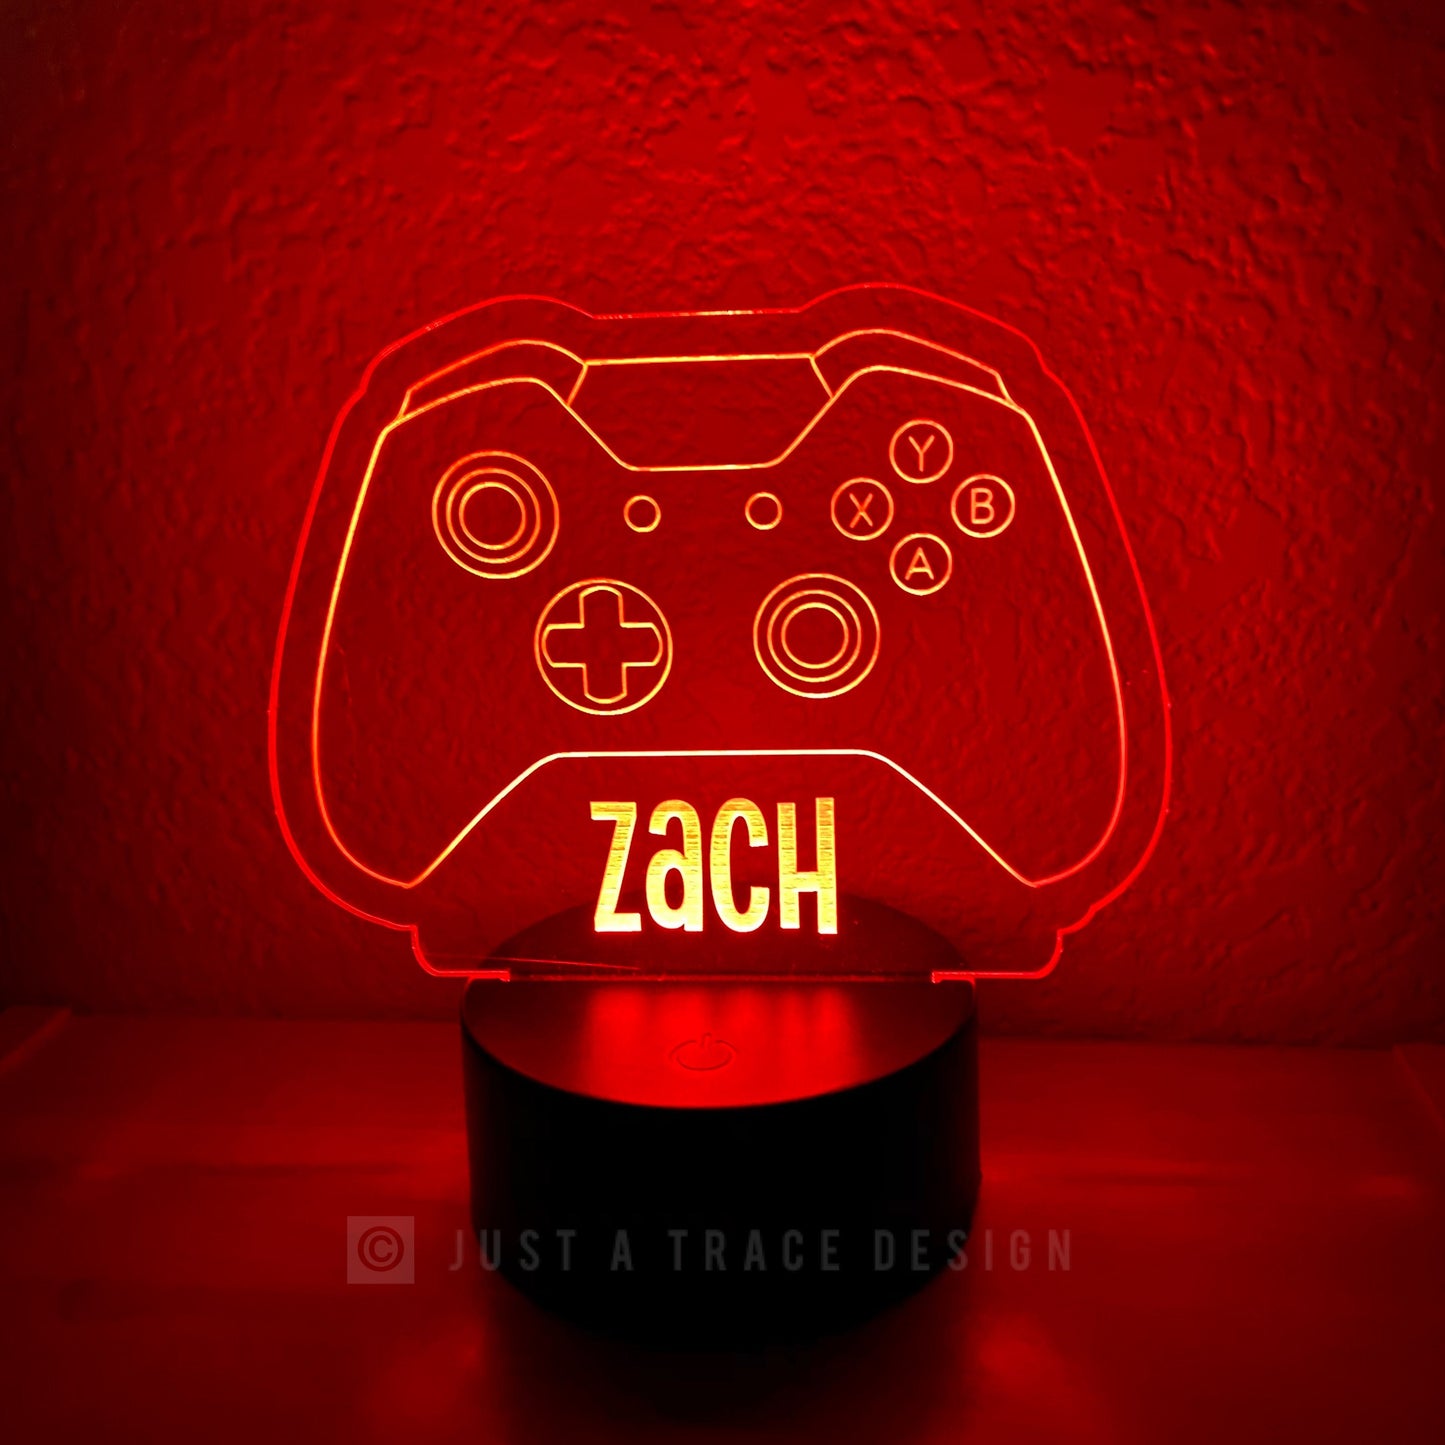 Xbox Personalized Gamer Tag Name Sign, Gaming Name LED Lamp, Personalized Tag,  Online Gaming, Gamer Tag LED Sign, Gamer Light Sign, Controller